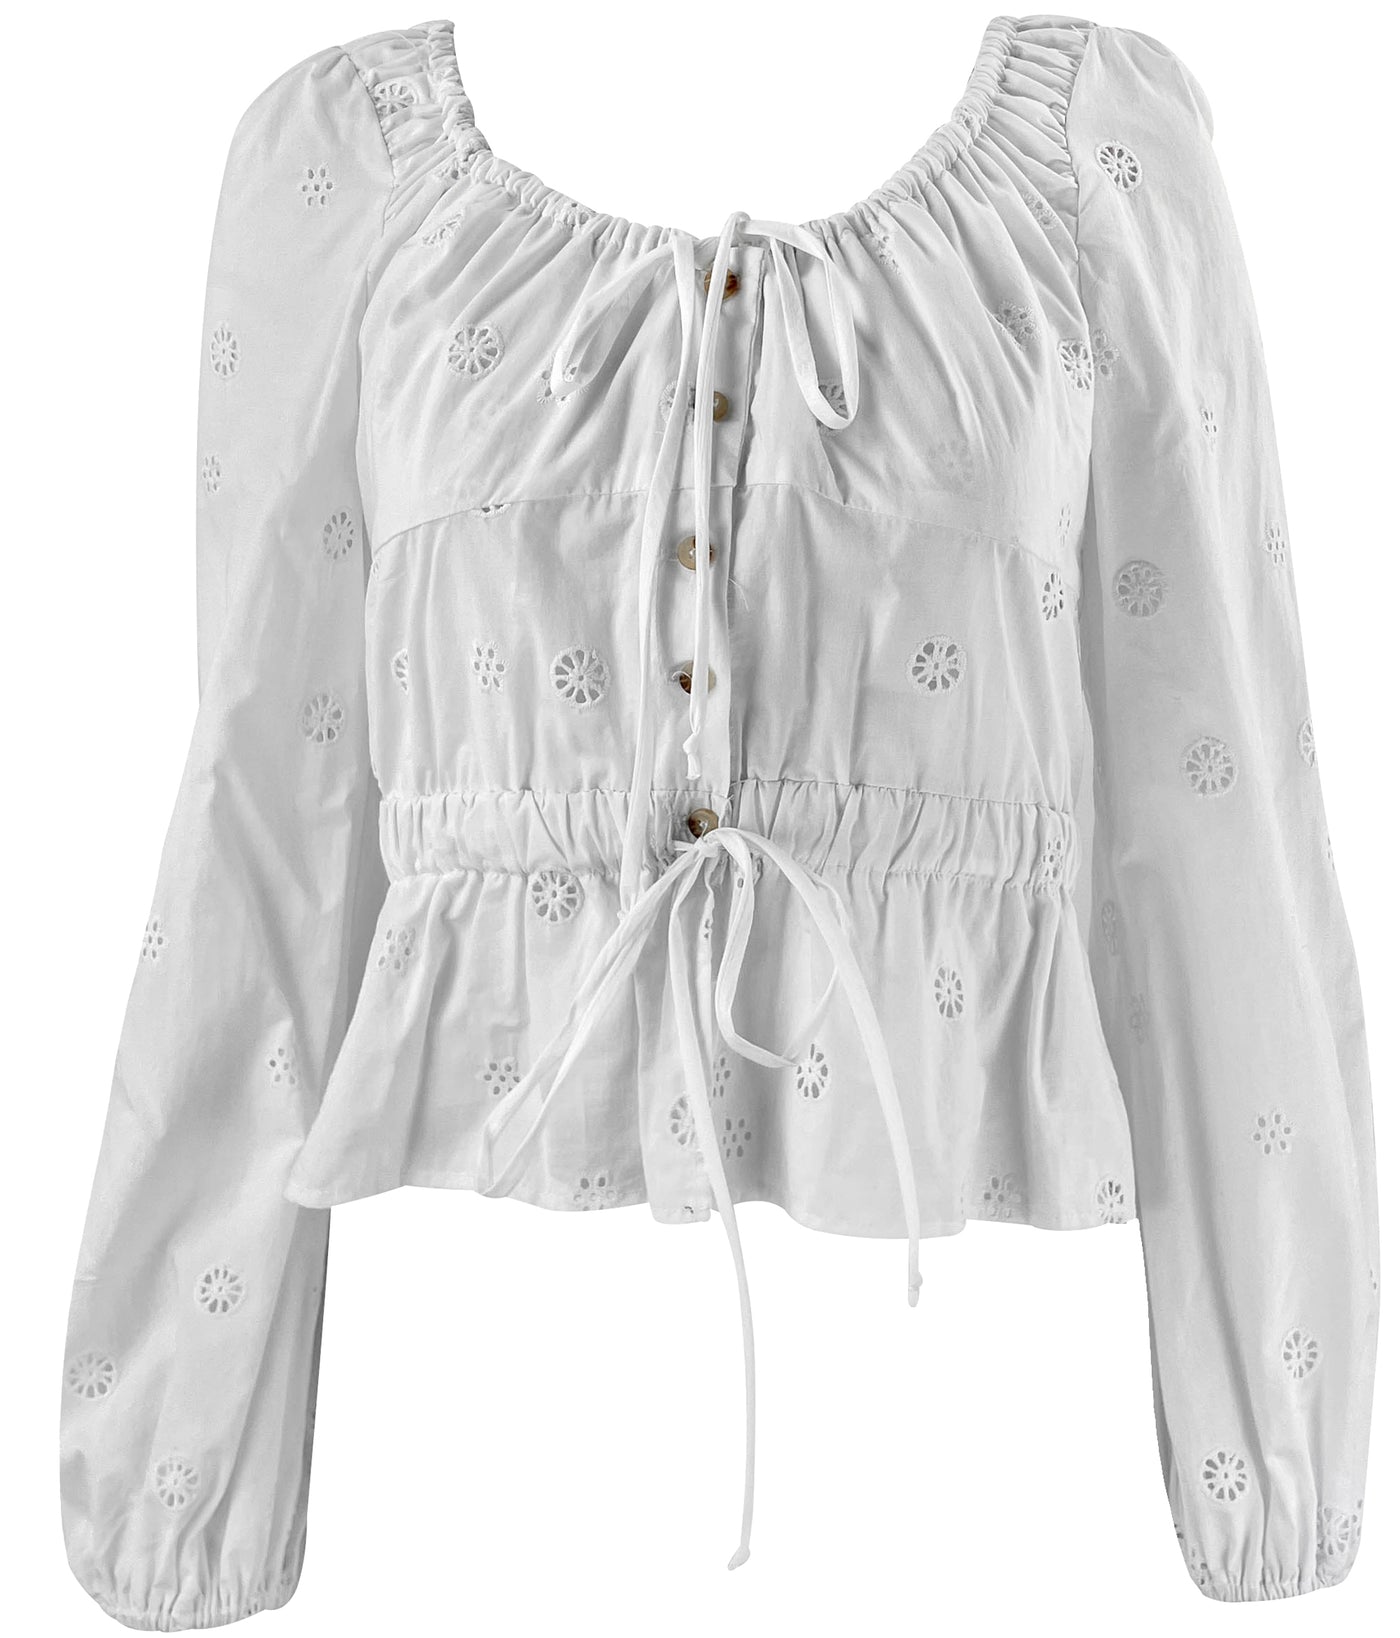 Ciao Lucia! Olympia Top in White - Discounts on Ciao Lucia! at UAL